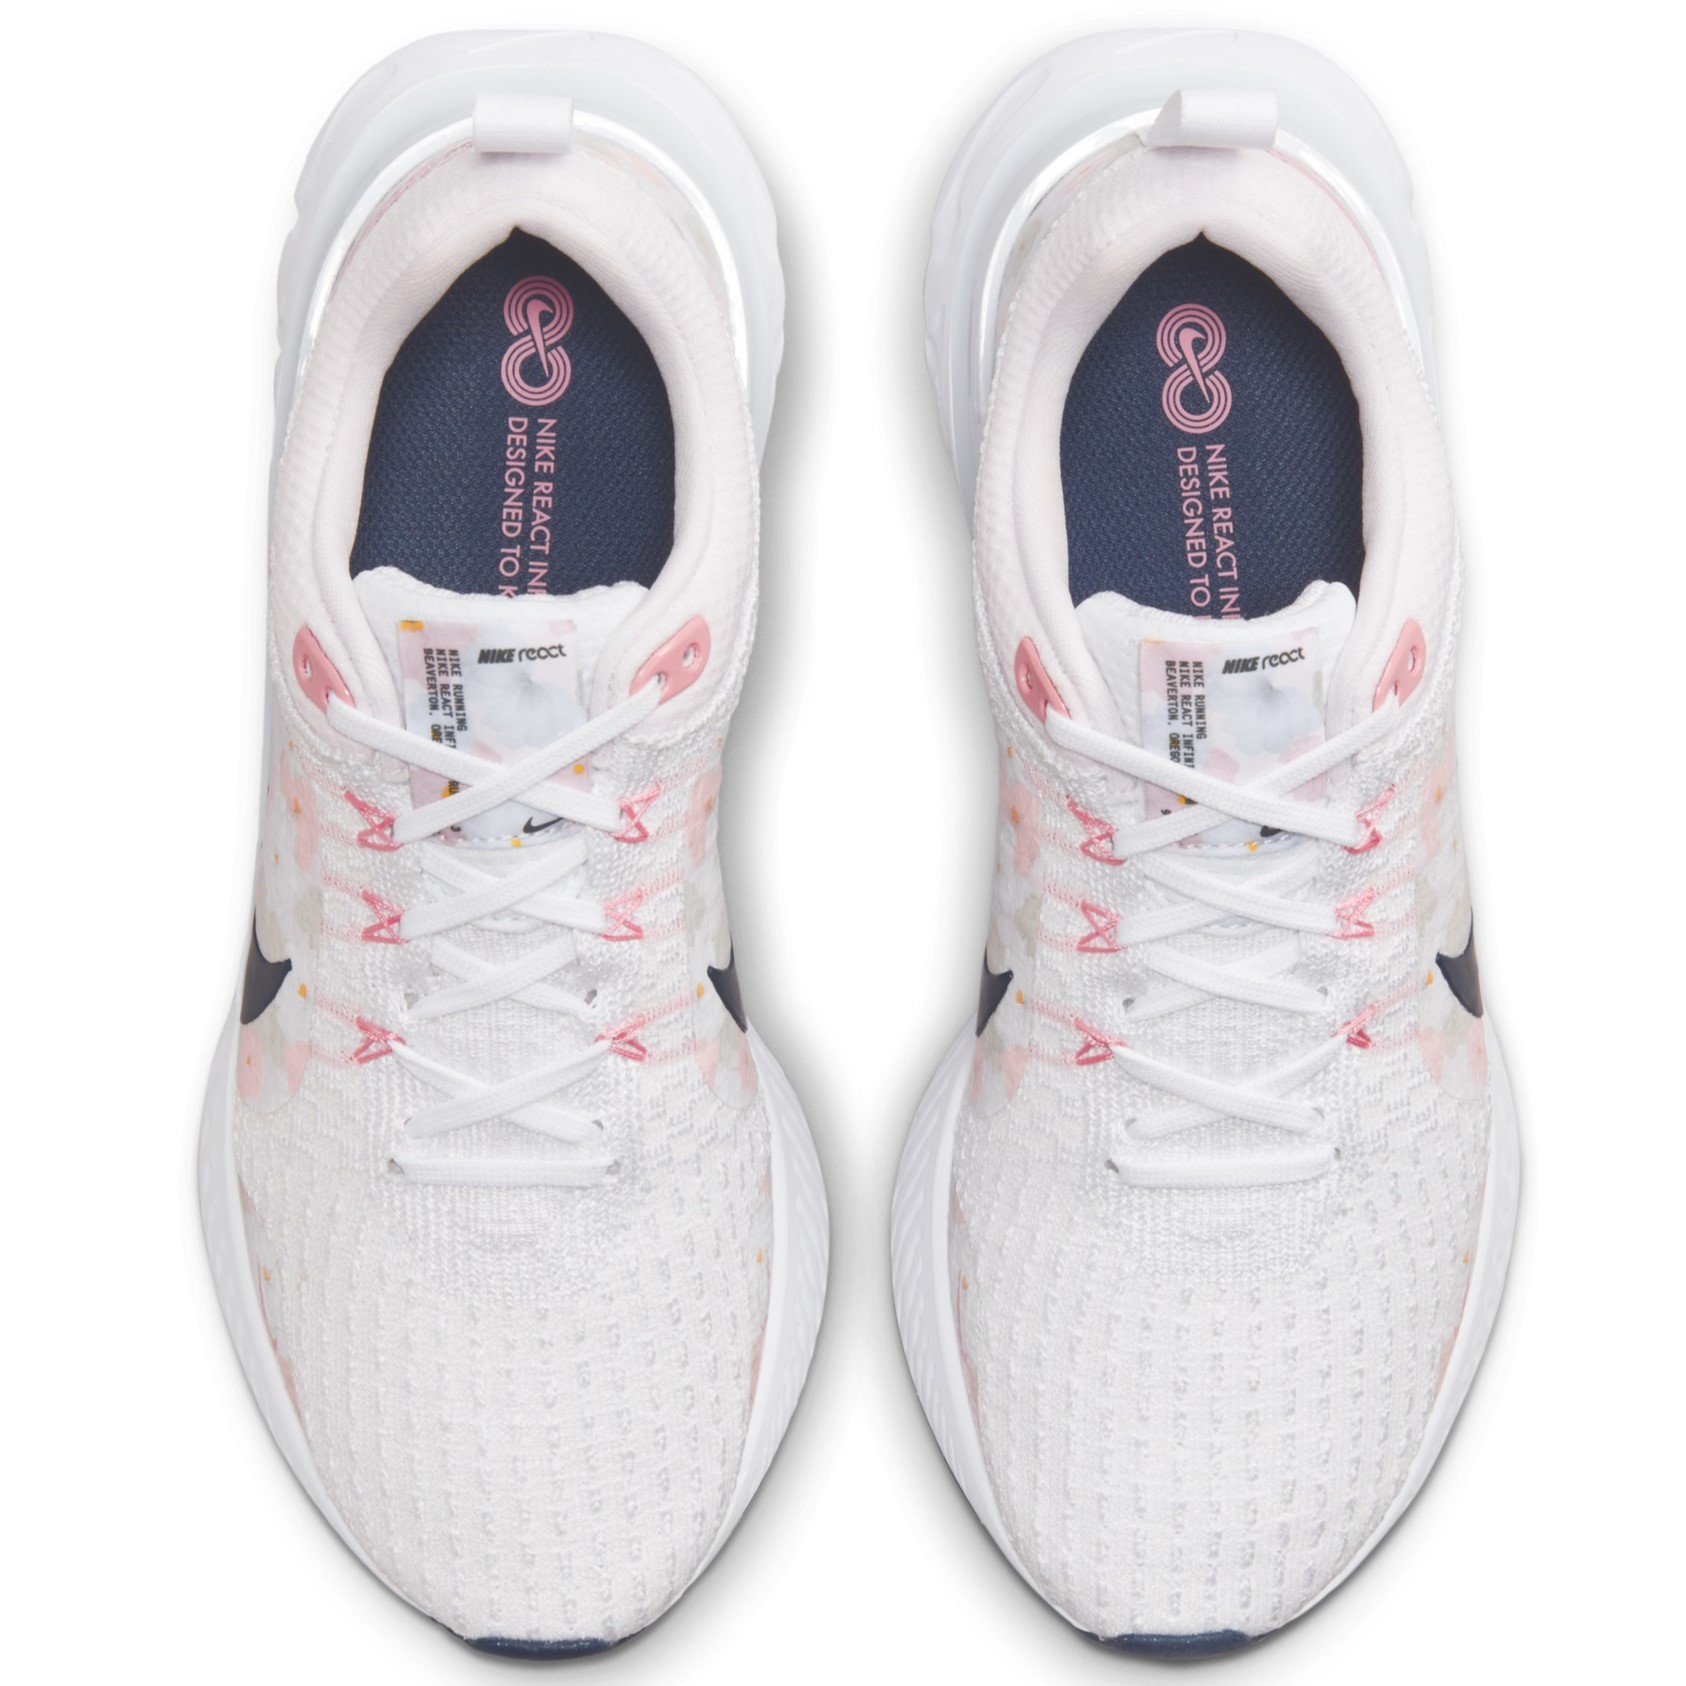 GIÀY NIKE NỮ REACT INFINITY 3 PREMIUM WHITE PEARL PINK WOMENS ROAD RUNNING SHOES FD4151-100 7